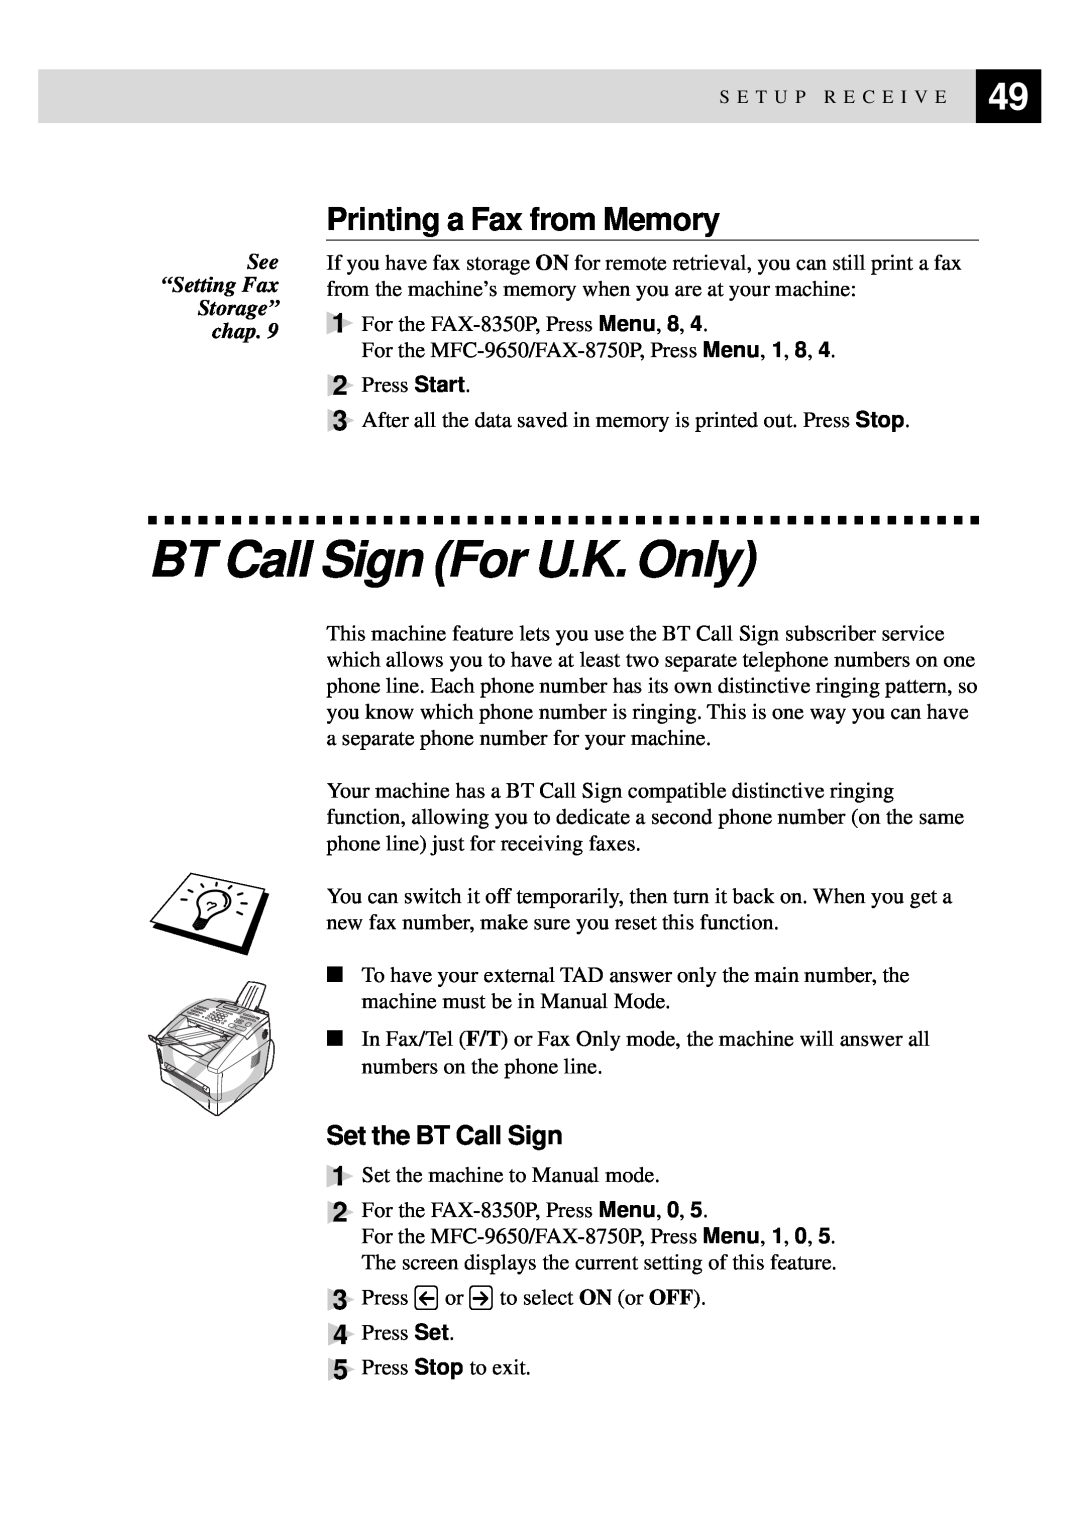 Brother MFC-9650, FAX-8350P owner manual BT Call Sign For U.K. Only, Printing a Fax from Memory, Set the BT Call Sign 